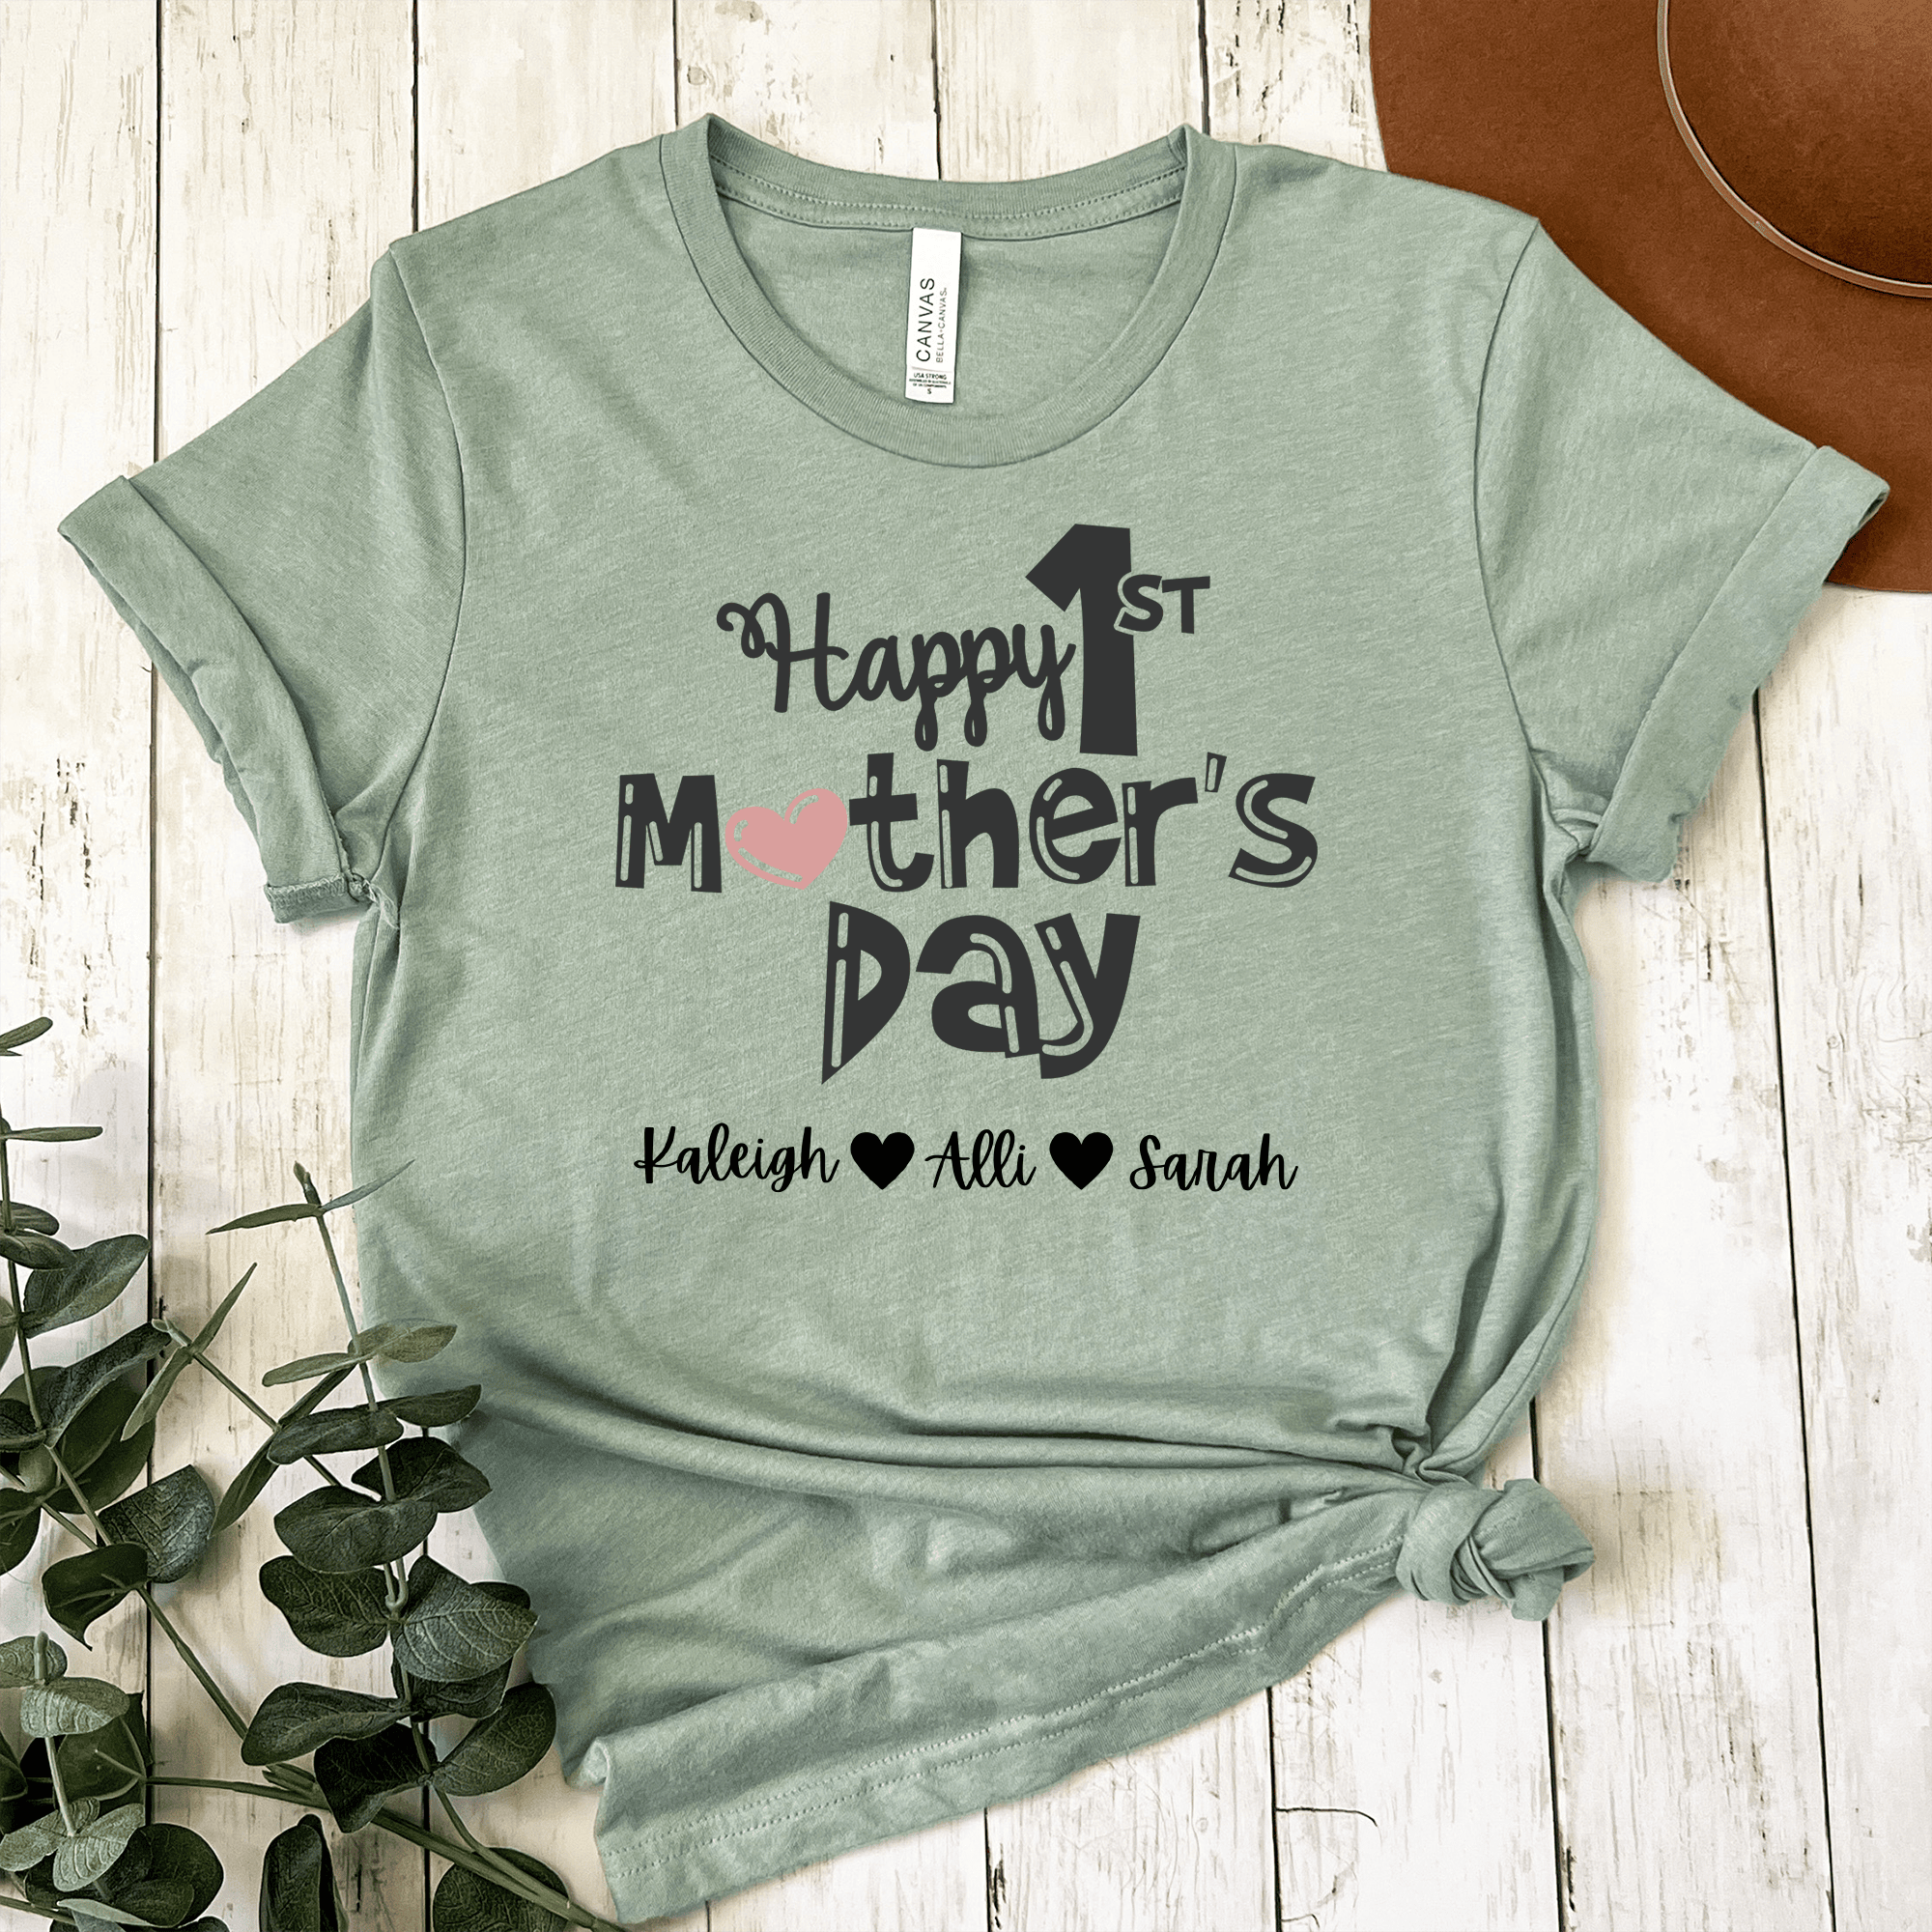 Womens Light Green T Shirt with First-Mothers-Day design